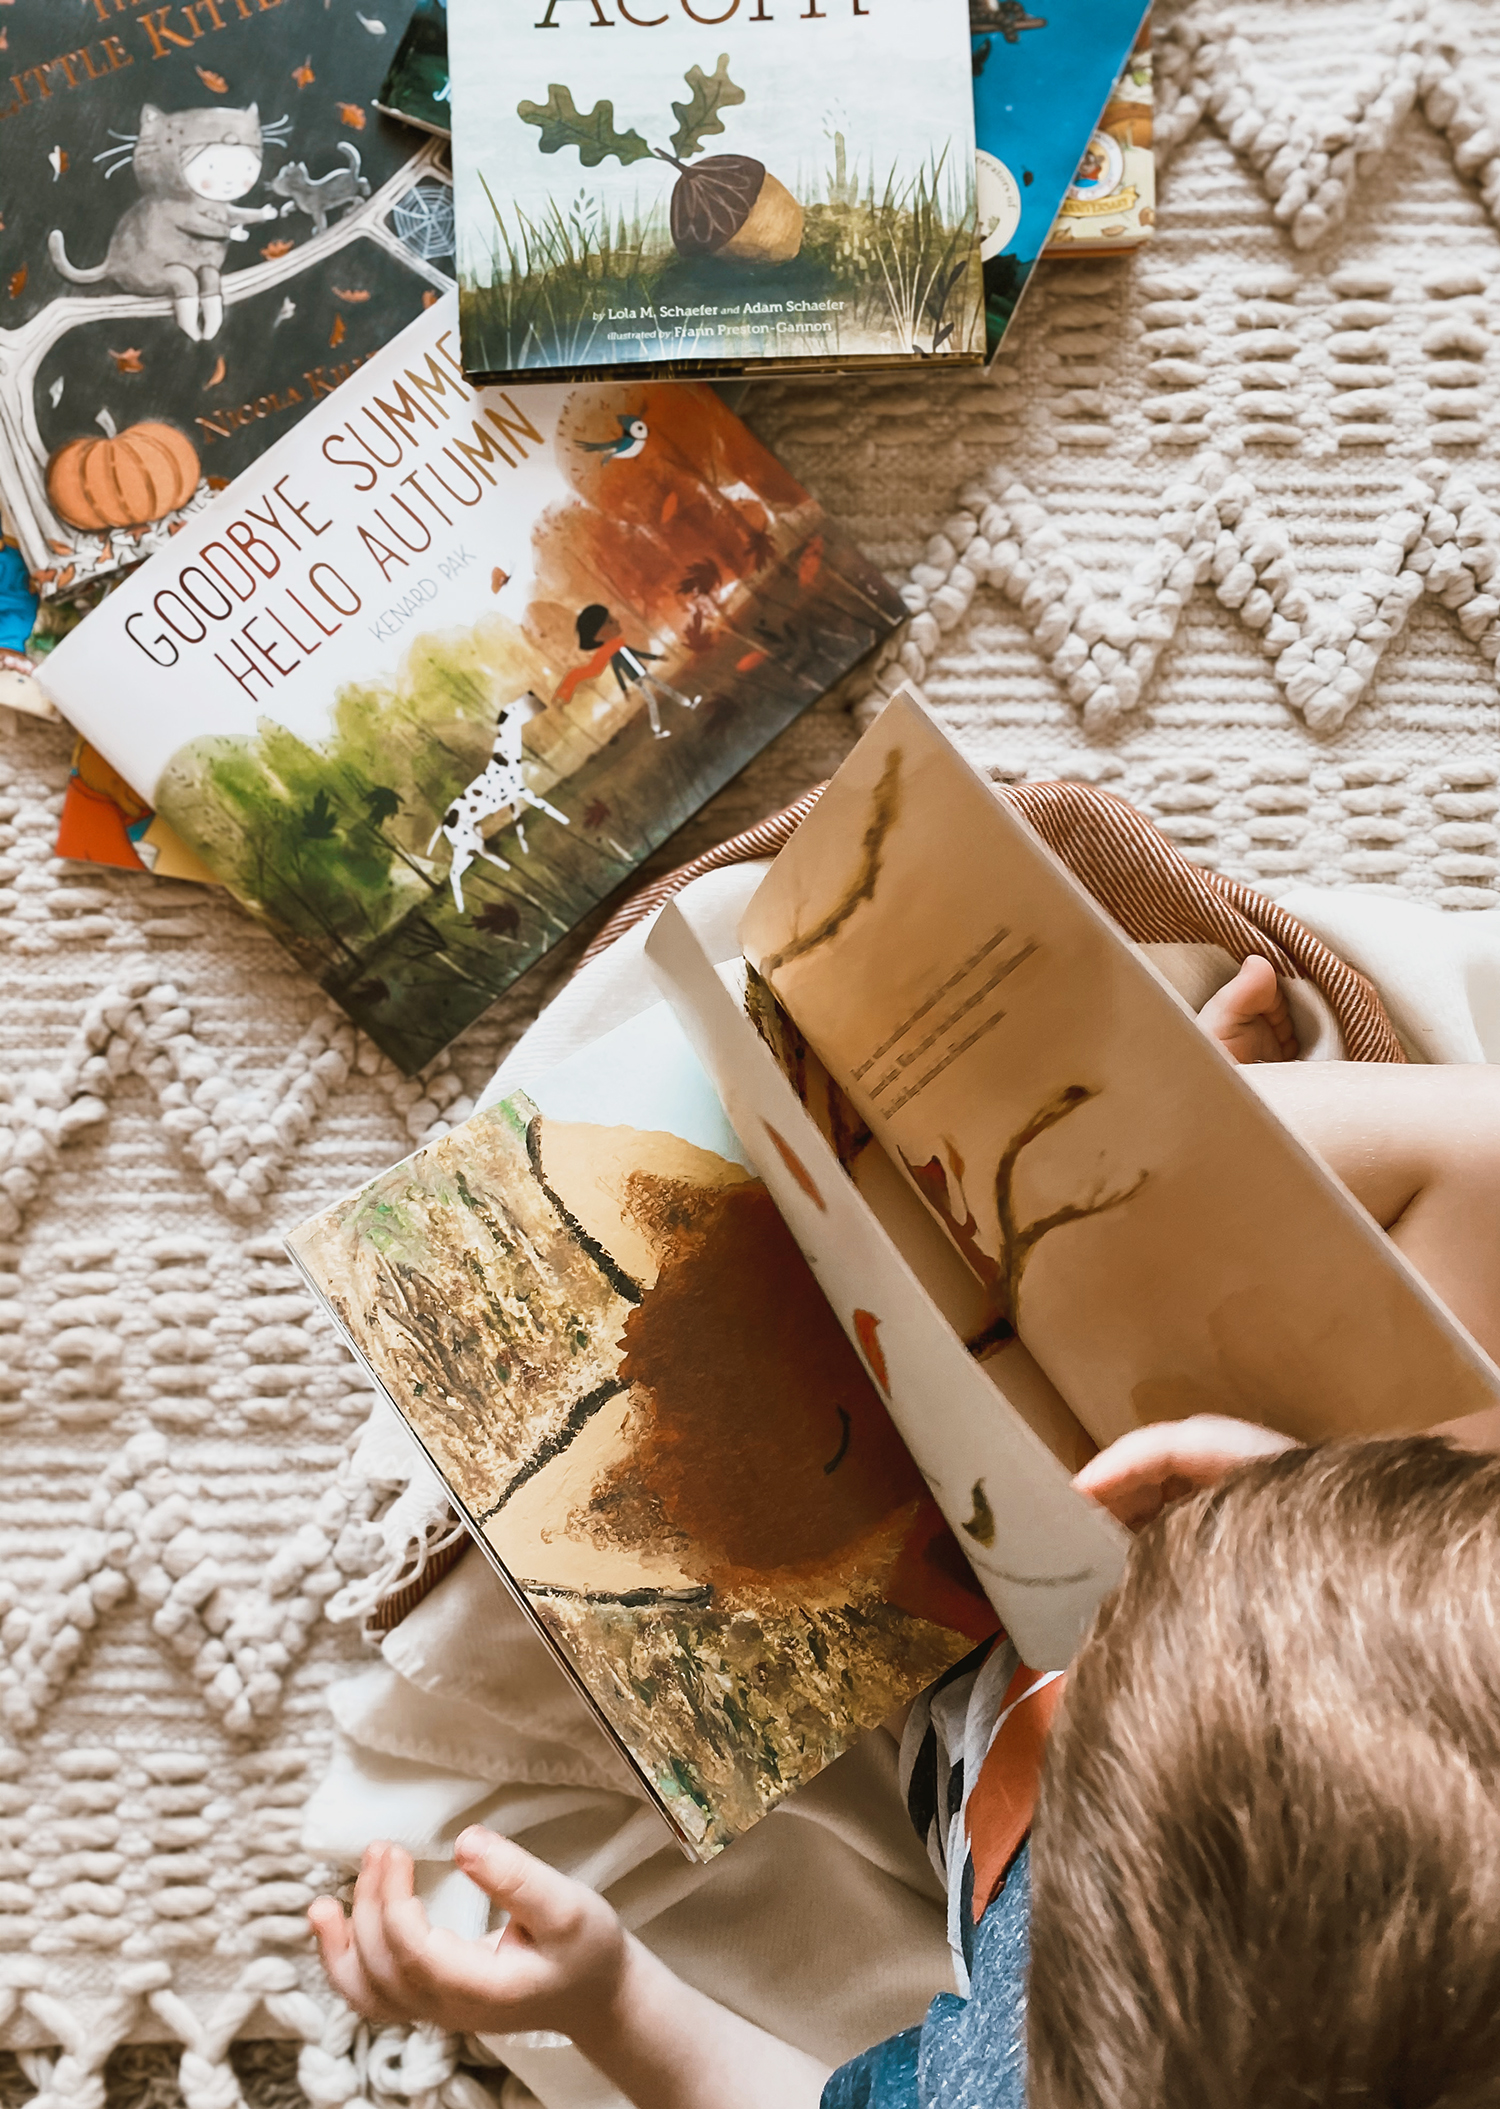 I love pulling out seasonal reads for our family library and for the kids to enjoy. Over on the blog I have gathered up our favorite fall reads along with a few things I have found to make reading in our home more enjoyable. Catch it on KaraLayne.com!